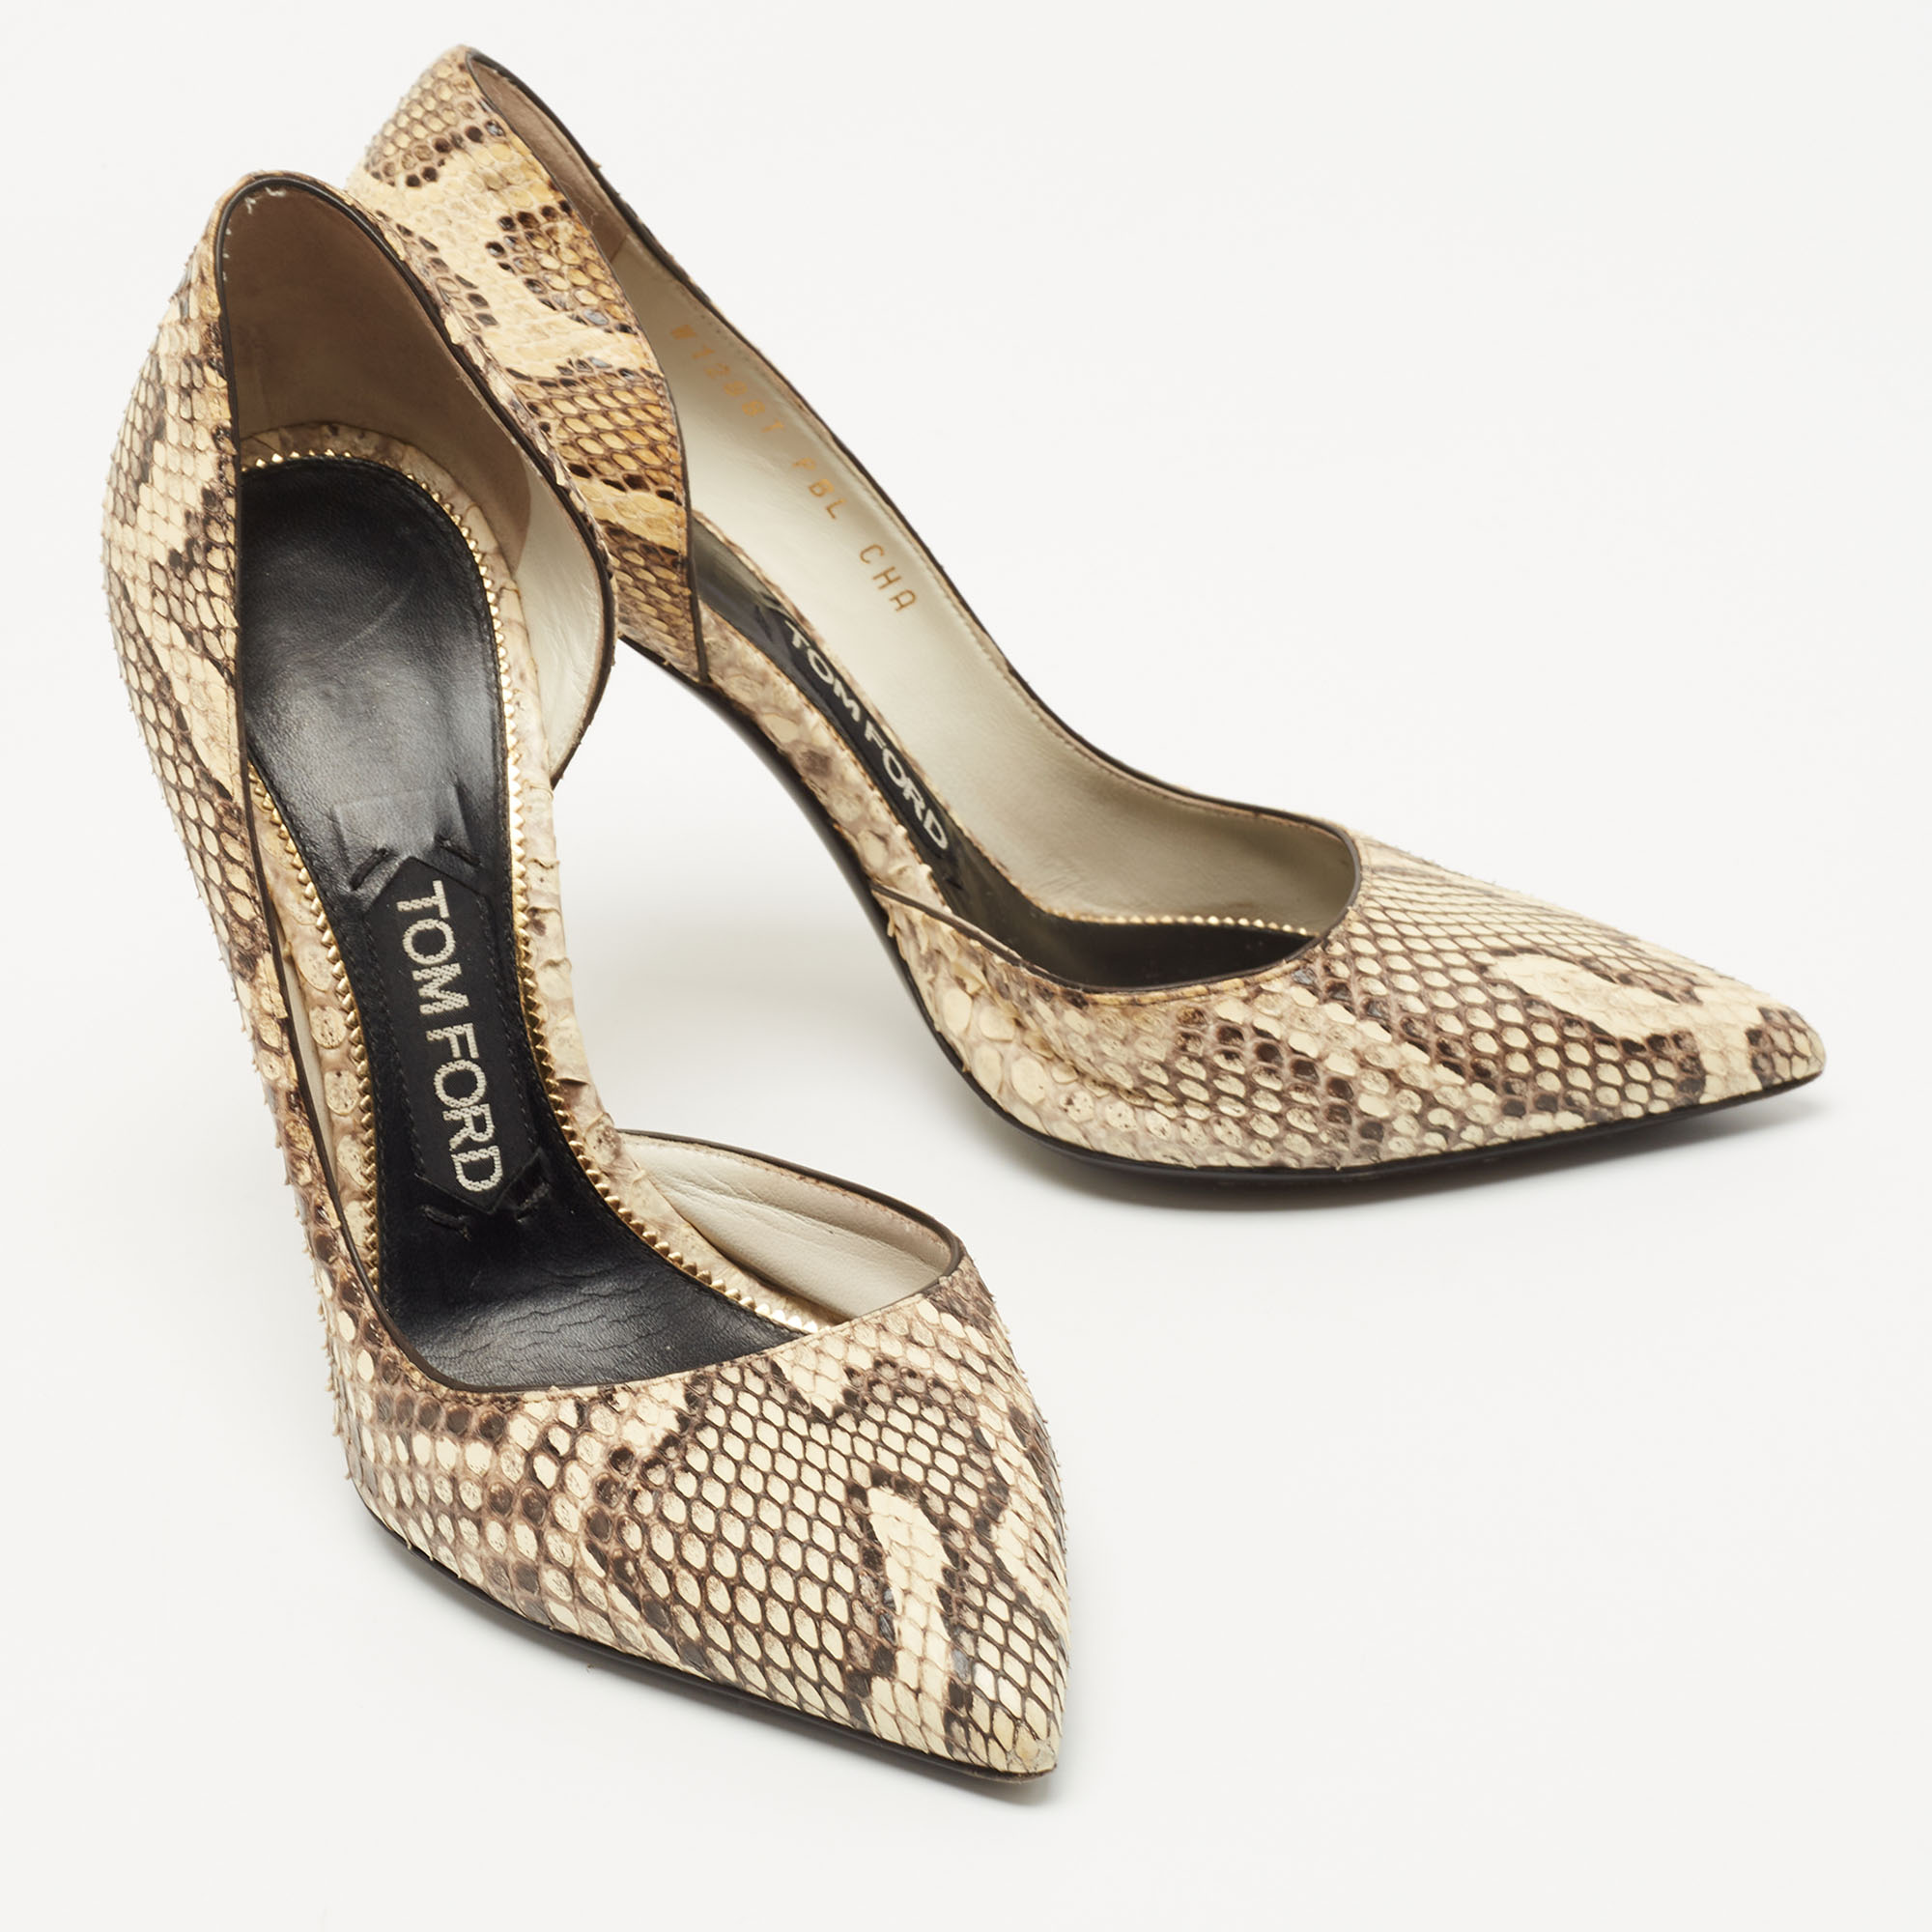 Tom Ford Beige/Brown Python Leather D'orsay Pointed Toe Pumps Size 37